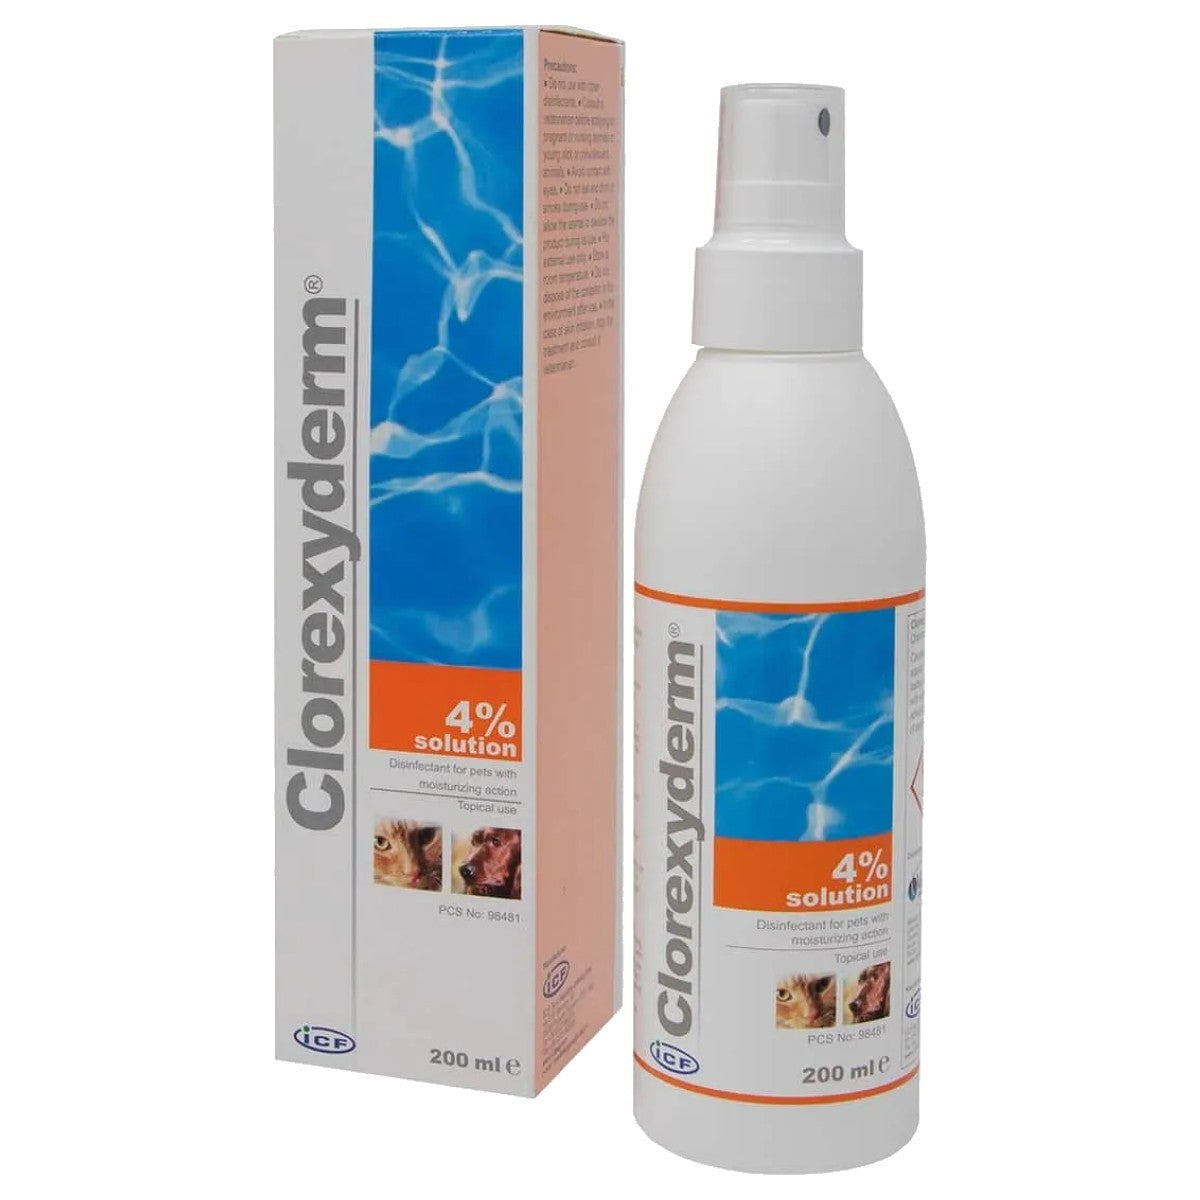 Clorexyderm 4% Spray Solution for Dogs and Cats